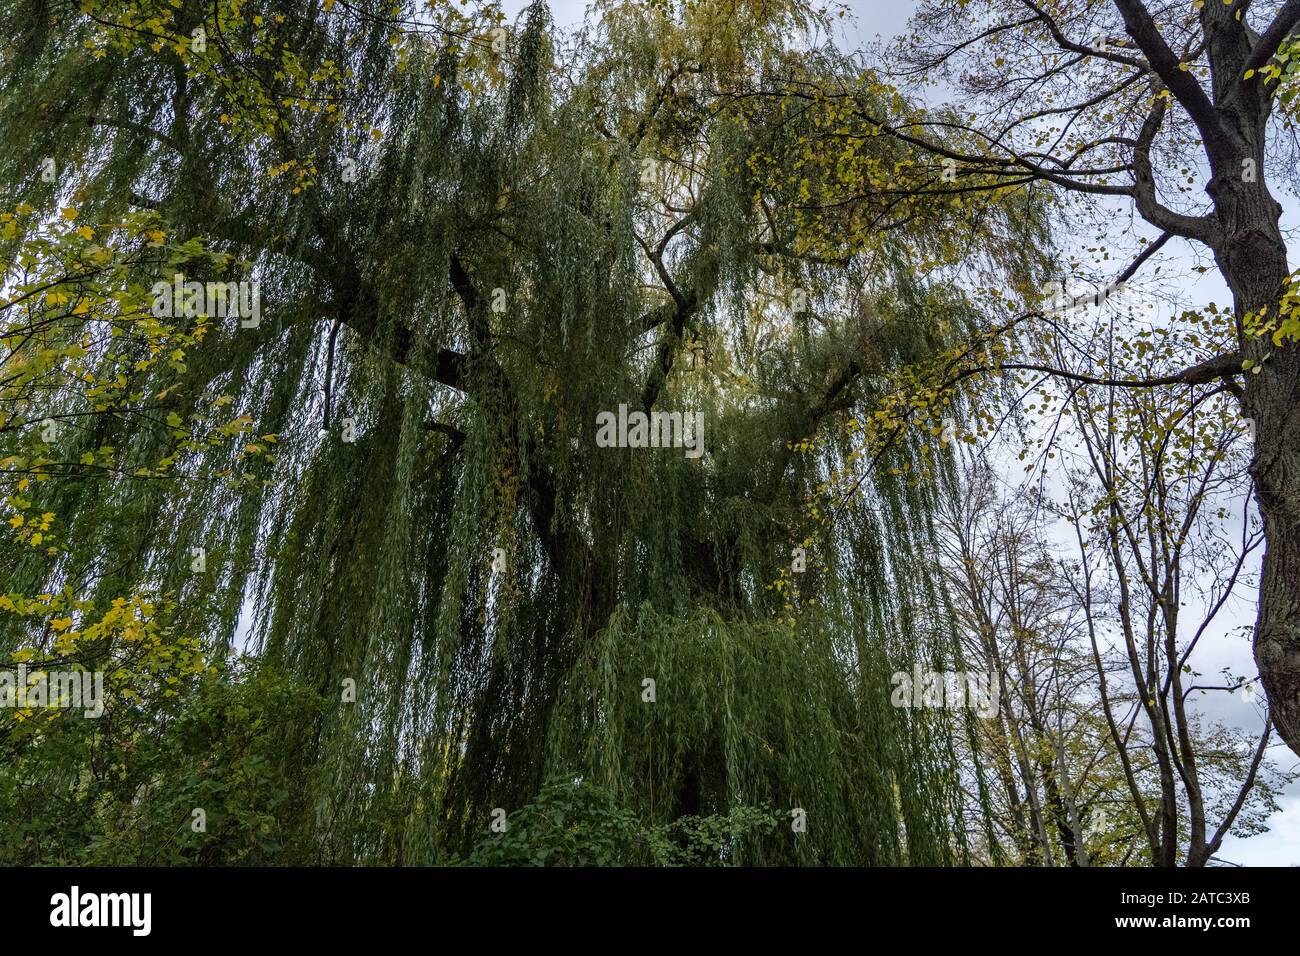 Big tree, Is amazing, A beautiful nature, tree in the city of Berlin city jungle, nature in the big city, season in Berlin, autu Photo - Alamy